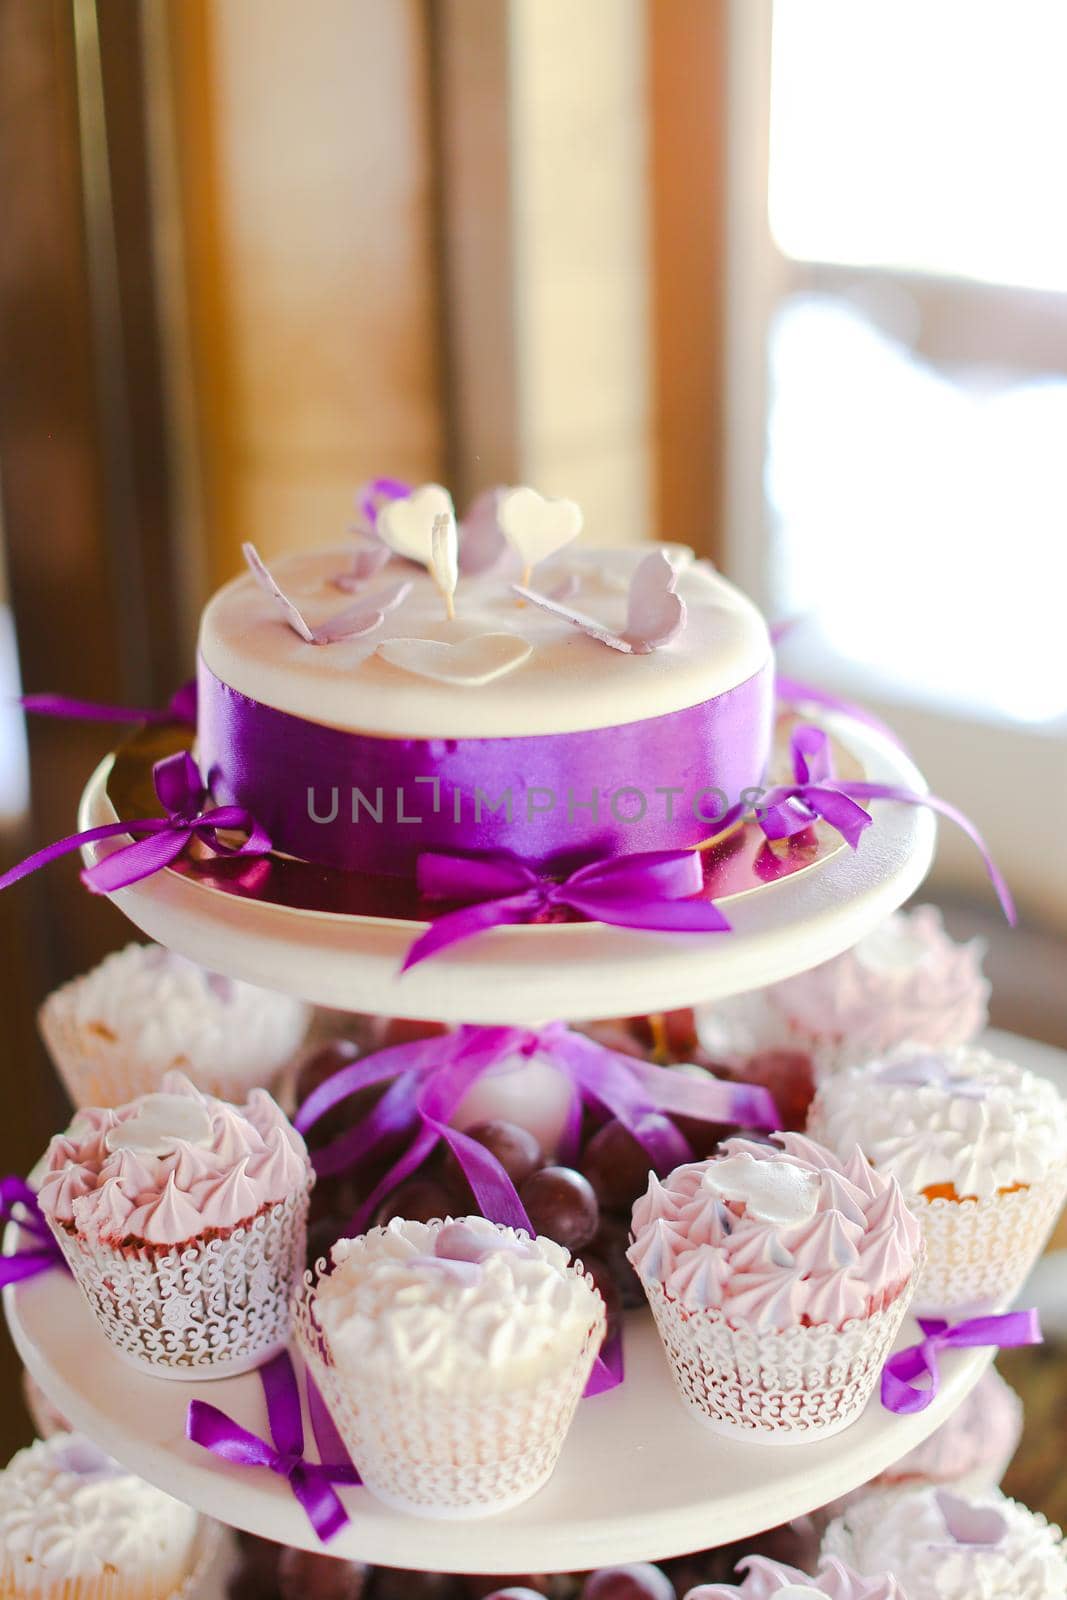 Violet decorations and sweet yummy cakes for party. Concept of birthday sweets and tasty food.